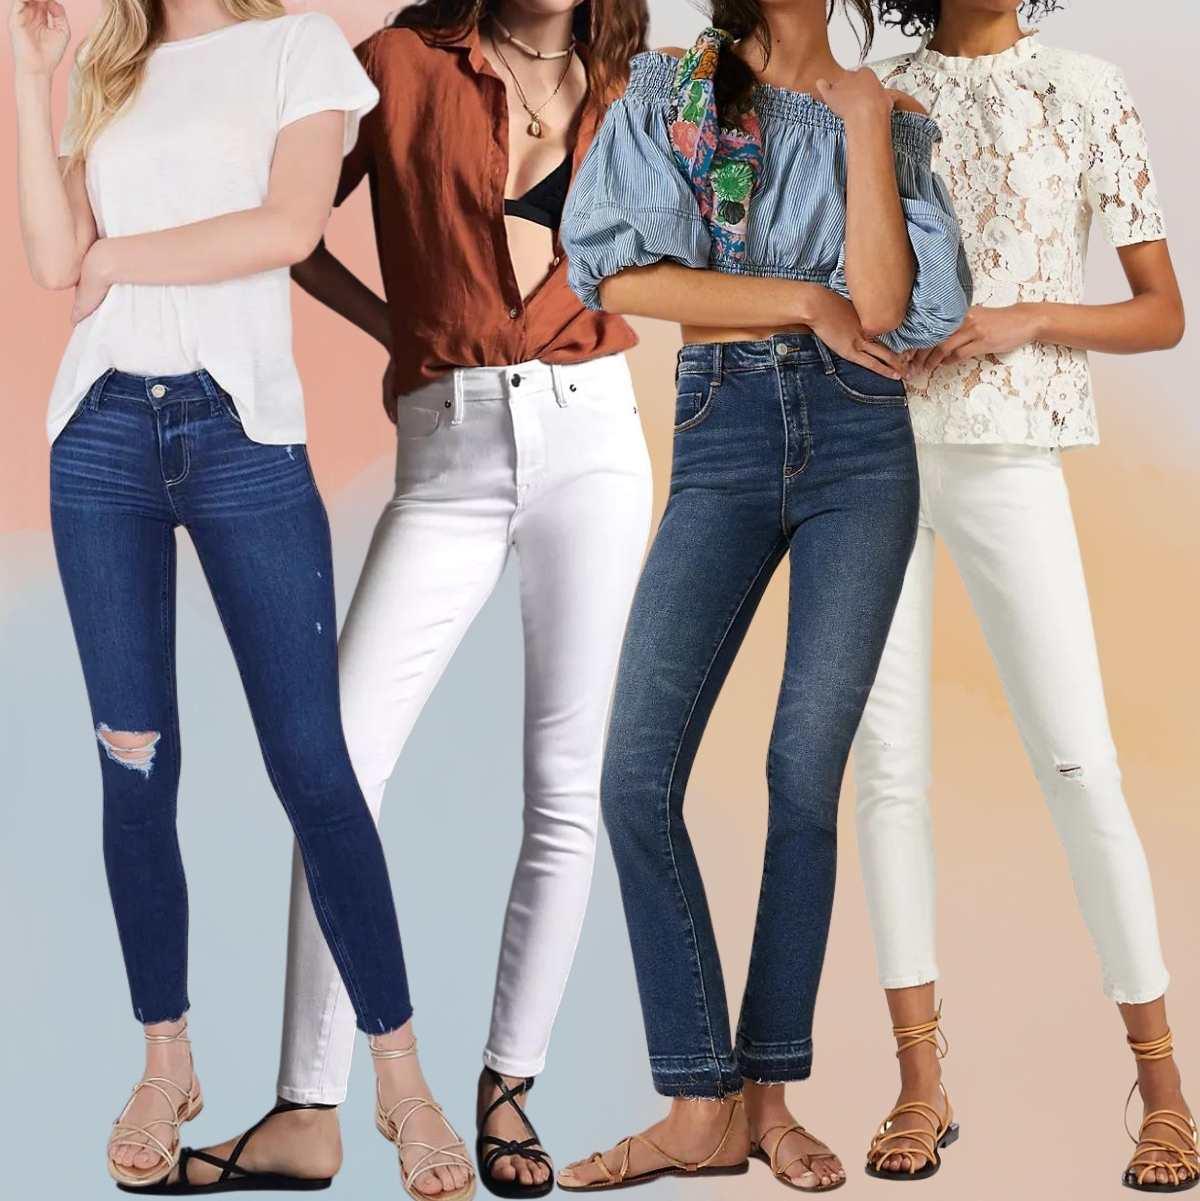 Collage of 5 women wearing slides with skinny jeans outfits.